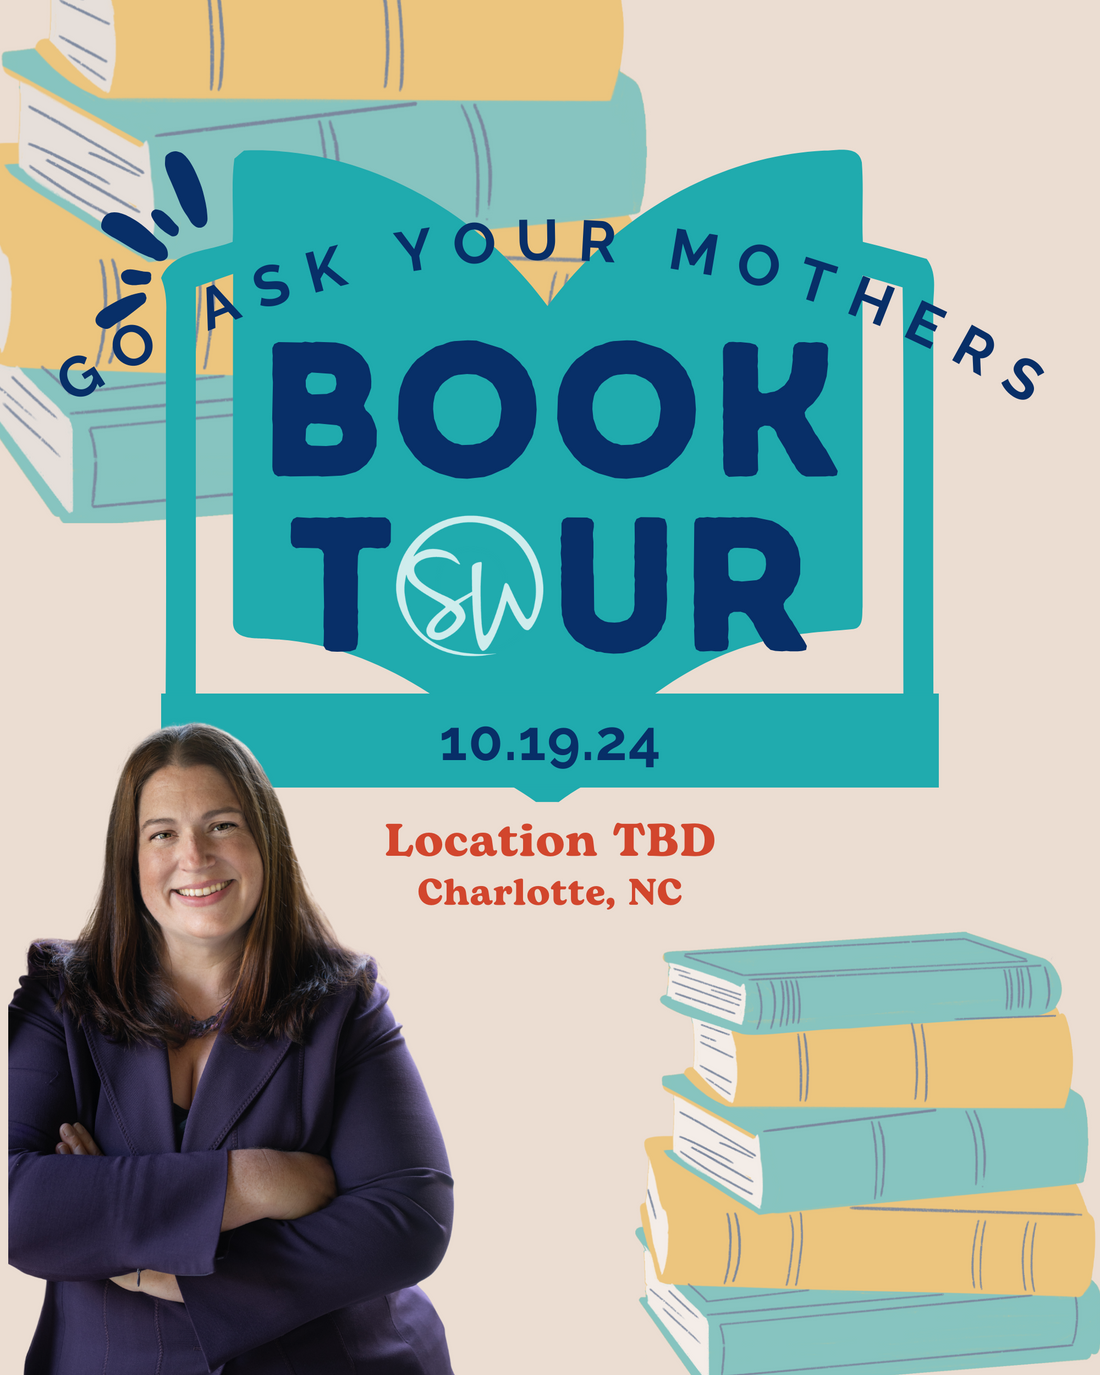 Go Ask Your Mothers w/Sarah Wells - Book Tour 2024 - Charlotte, NC - FREE Ticket